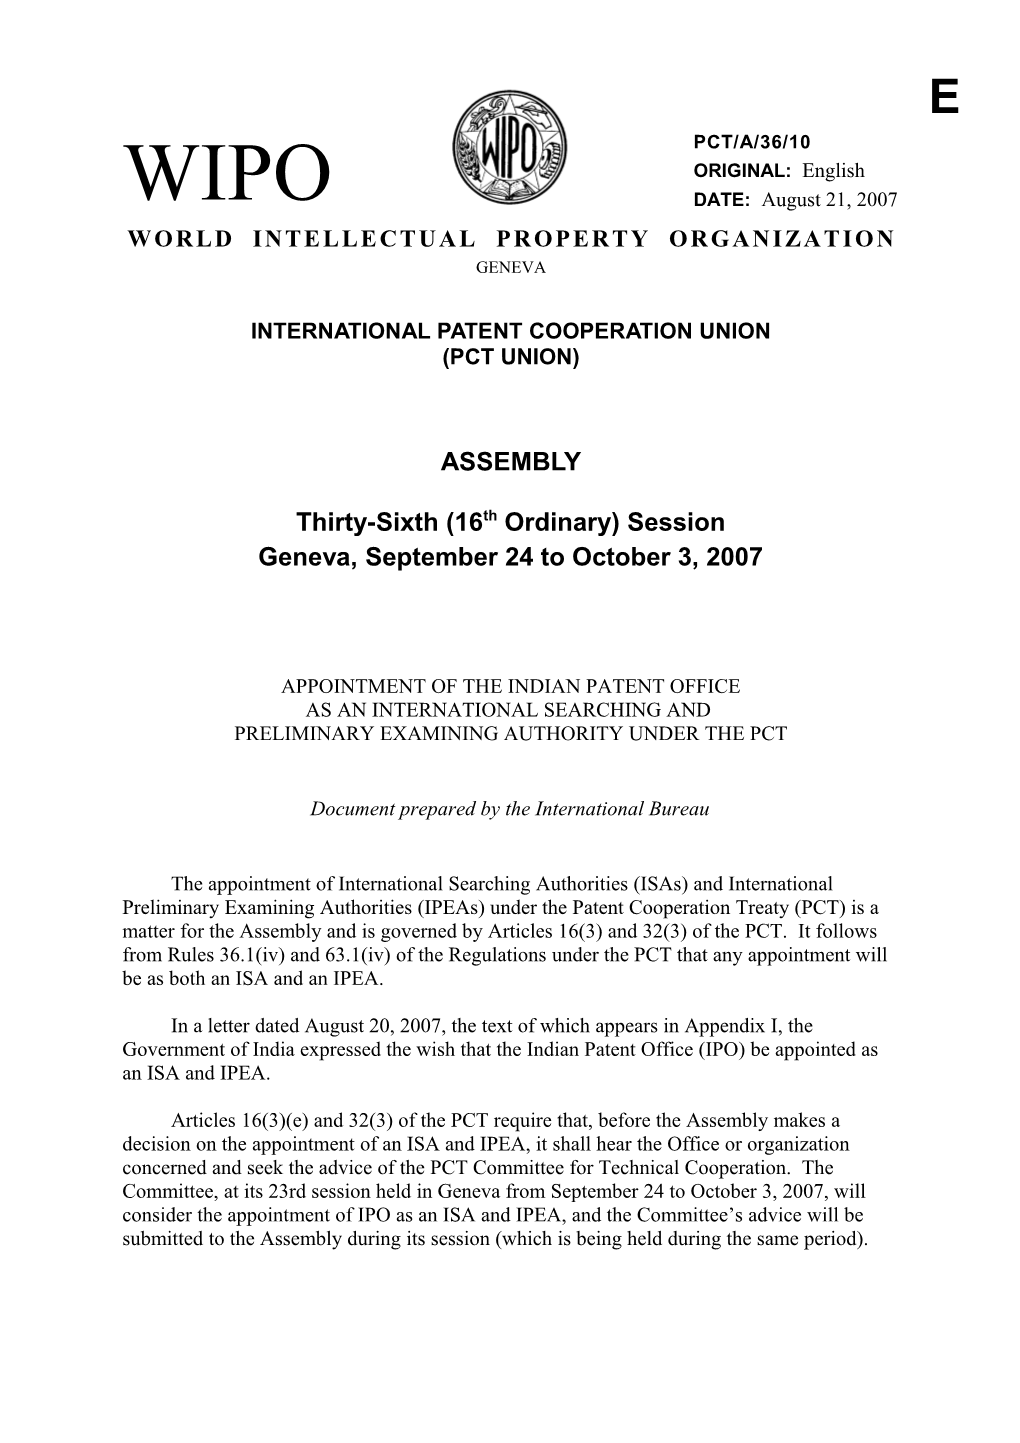 PCT/A/36/10: Appointment of the Indian Patent Office As an International Searching And